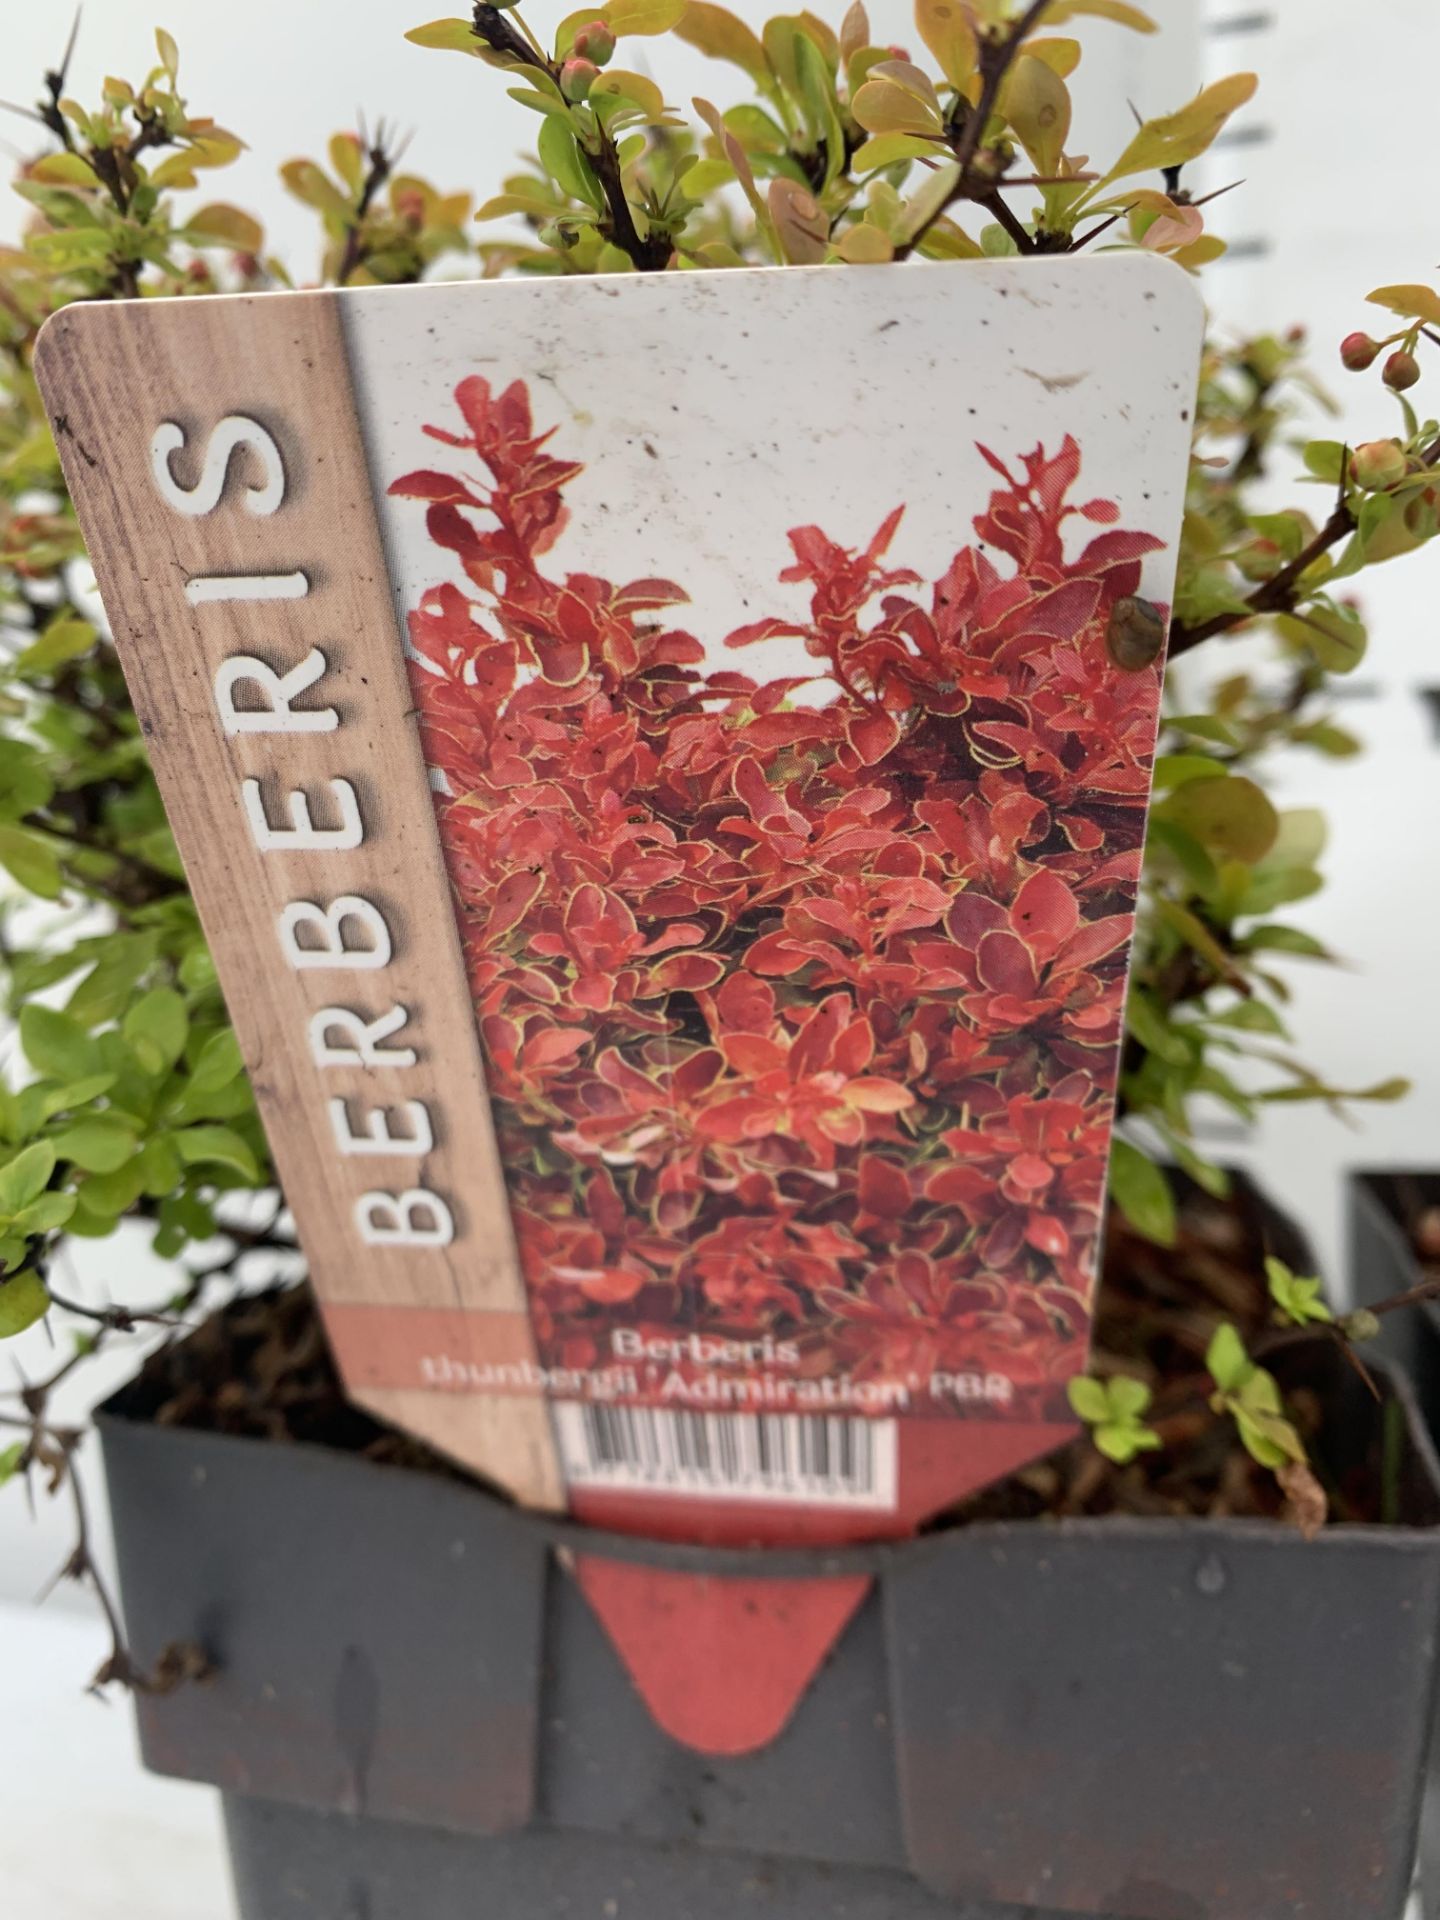 THREE ASSORTED BERBERIS THUNBERGII 'RUBY STAR' 'TINY GOLD' AND 'ADMIRATION' IN 2 LTR POTS PLUS VAT - Image 11 of 12